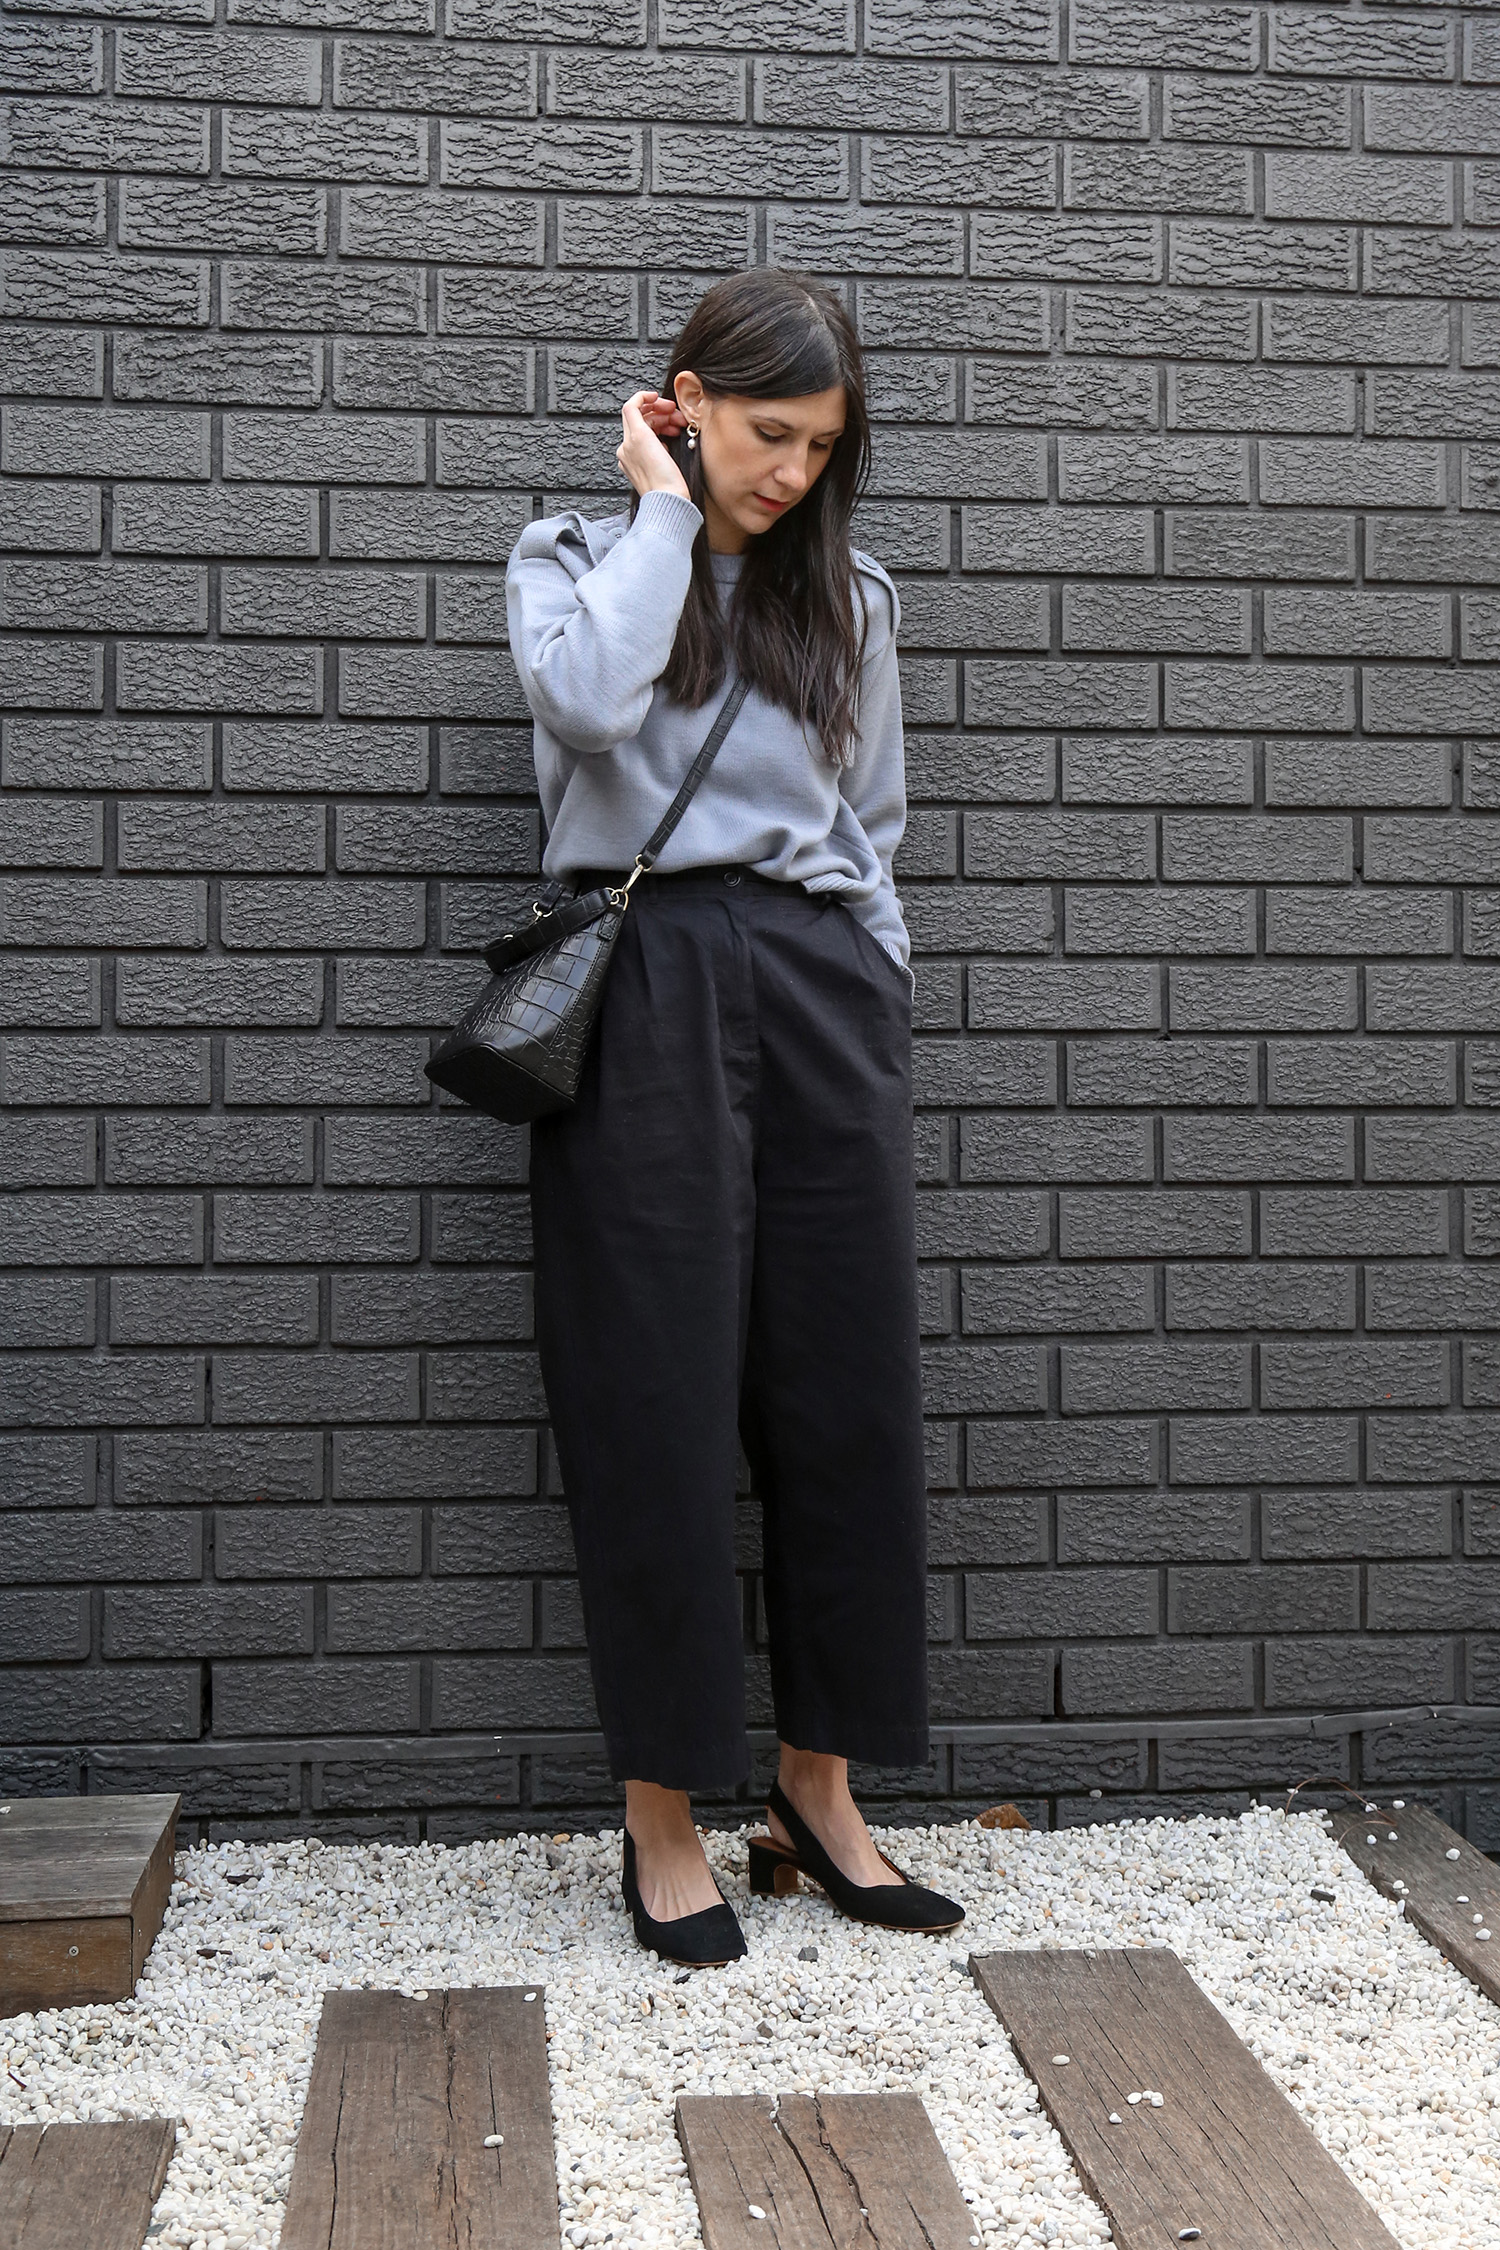 The Rule of Thirds in relation to style